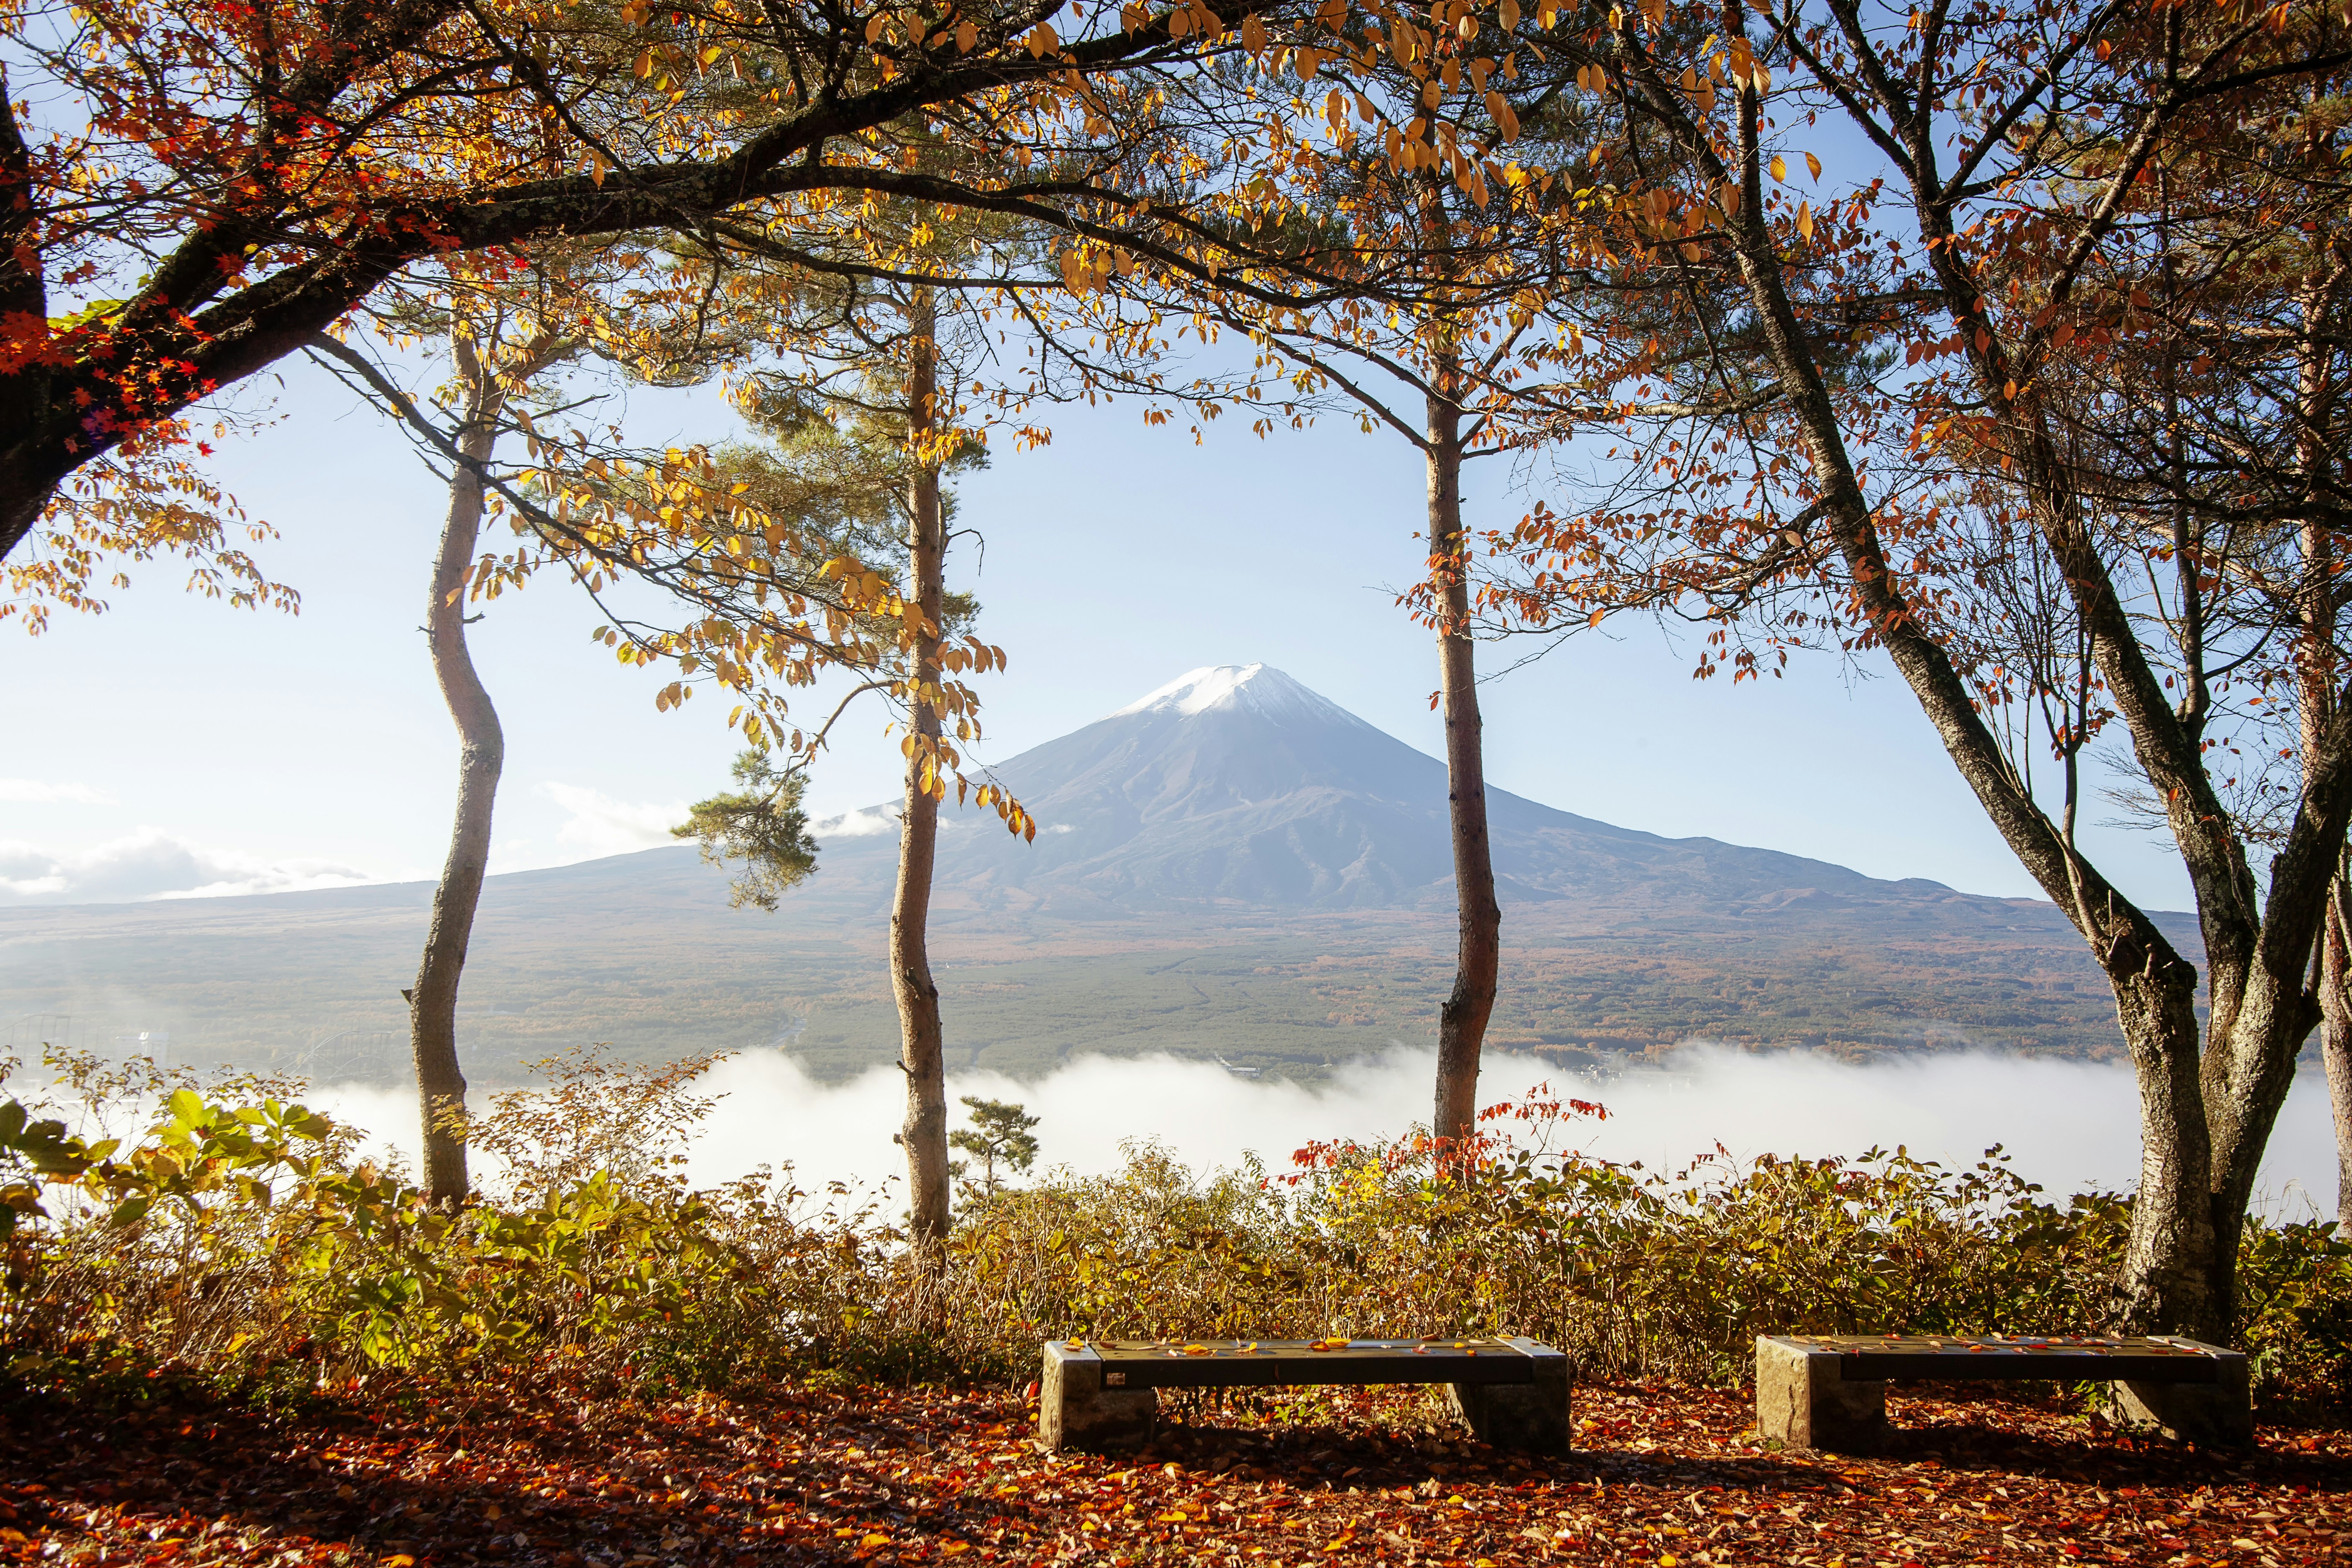 Two bench stand empty beneath trees with autumnal leaves and next to a large lake, Lake Kawaguchiko, with the giant Mt Fuji in the distance. The mountain is topped by snow.